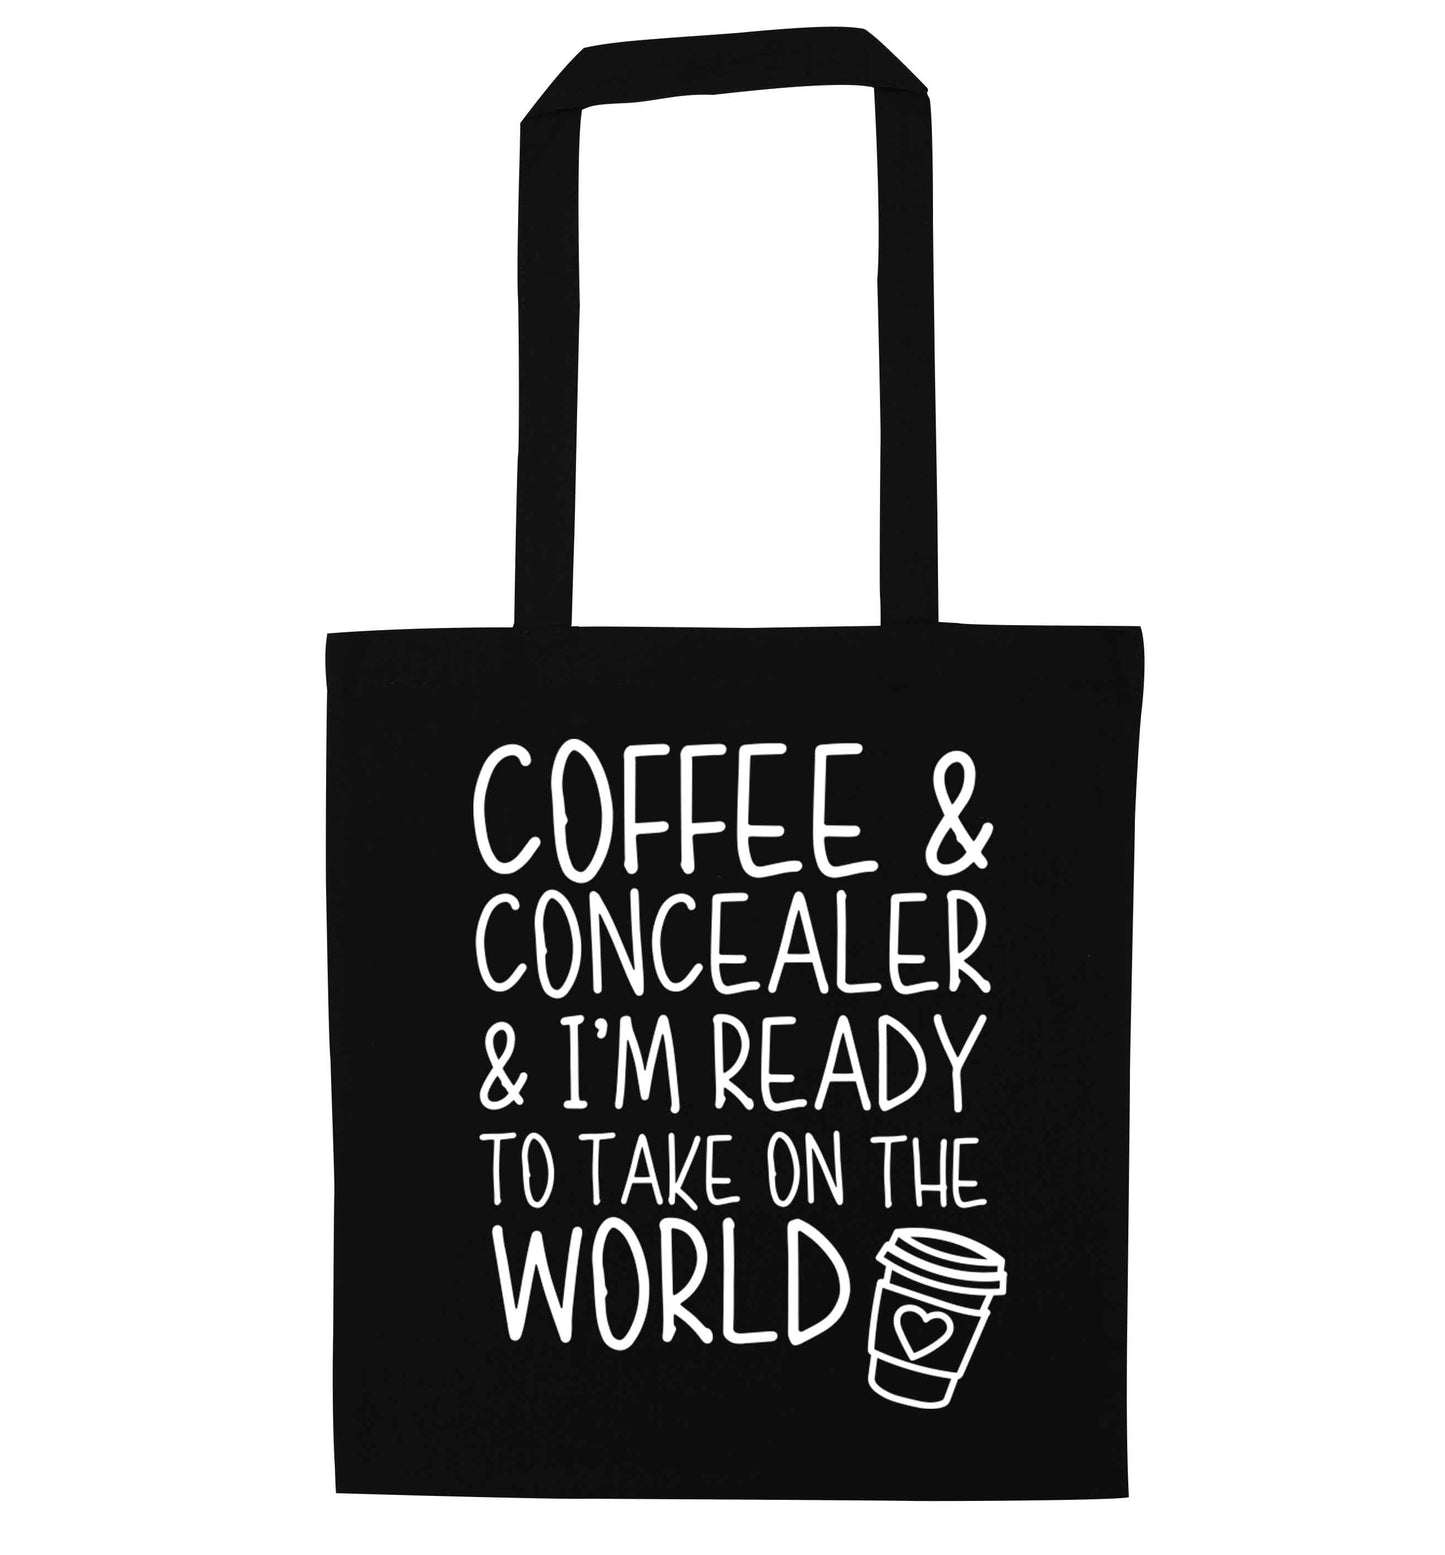 Coffee and concealer and I'm ready to take on the world black tote bag